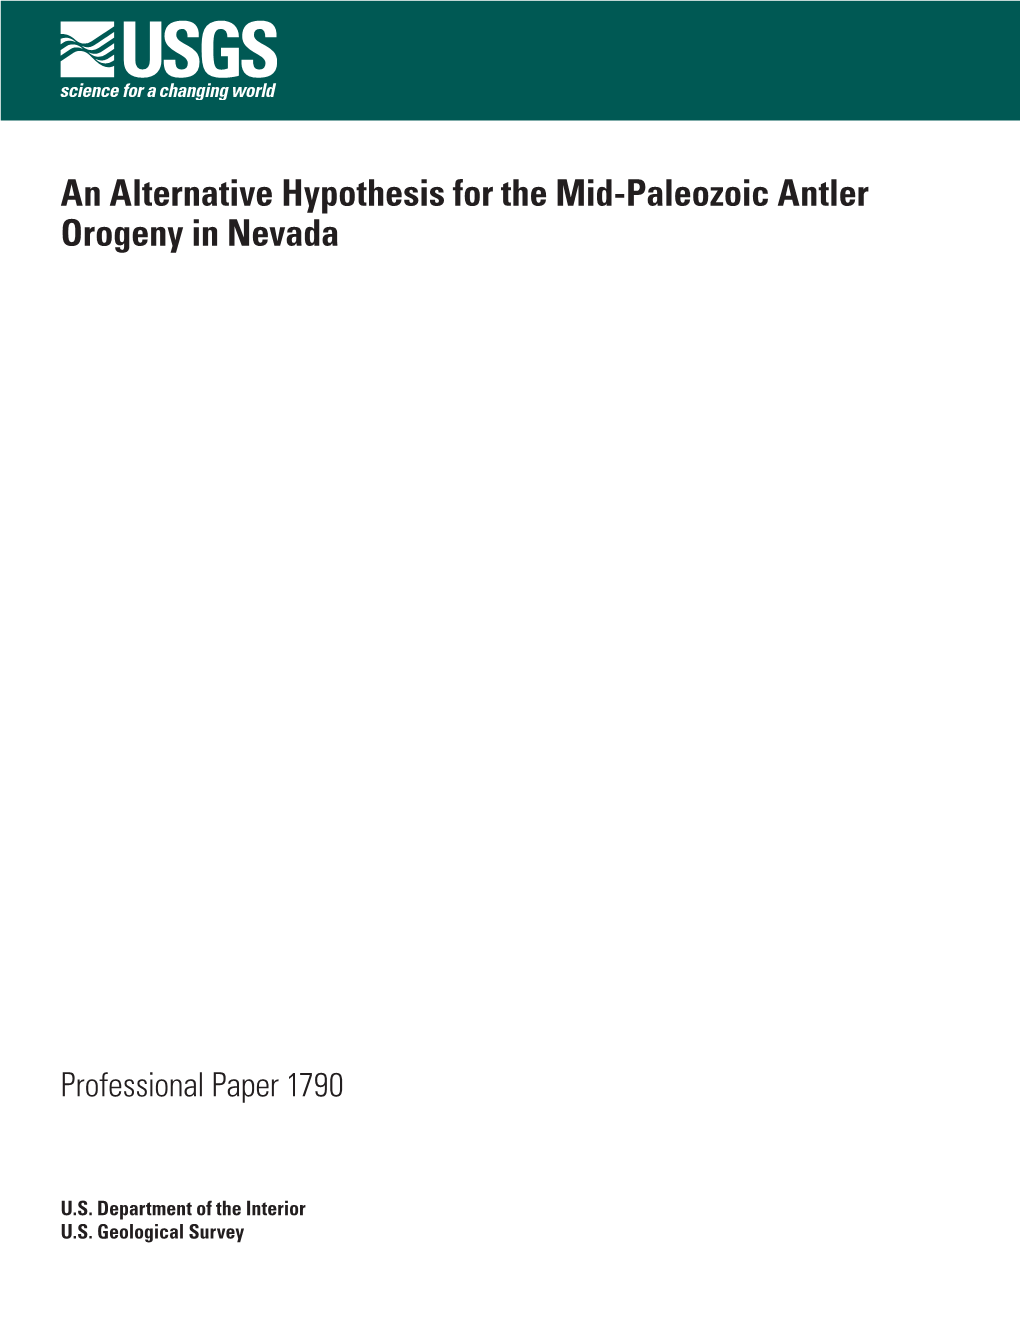 An Alternative Hypothesis for the Mid-Paleozoic Antler Orogeny in Nevada